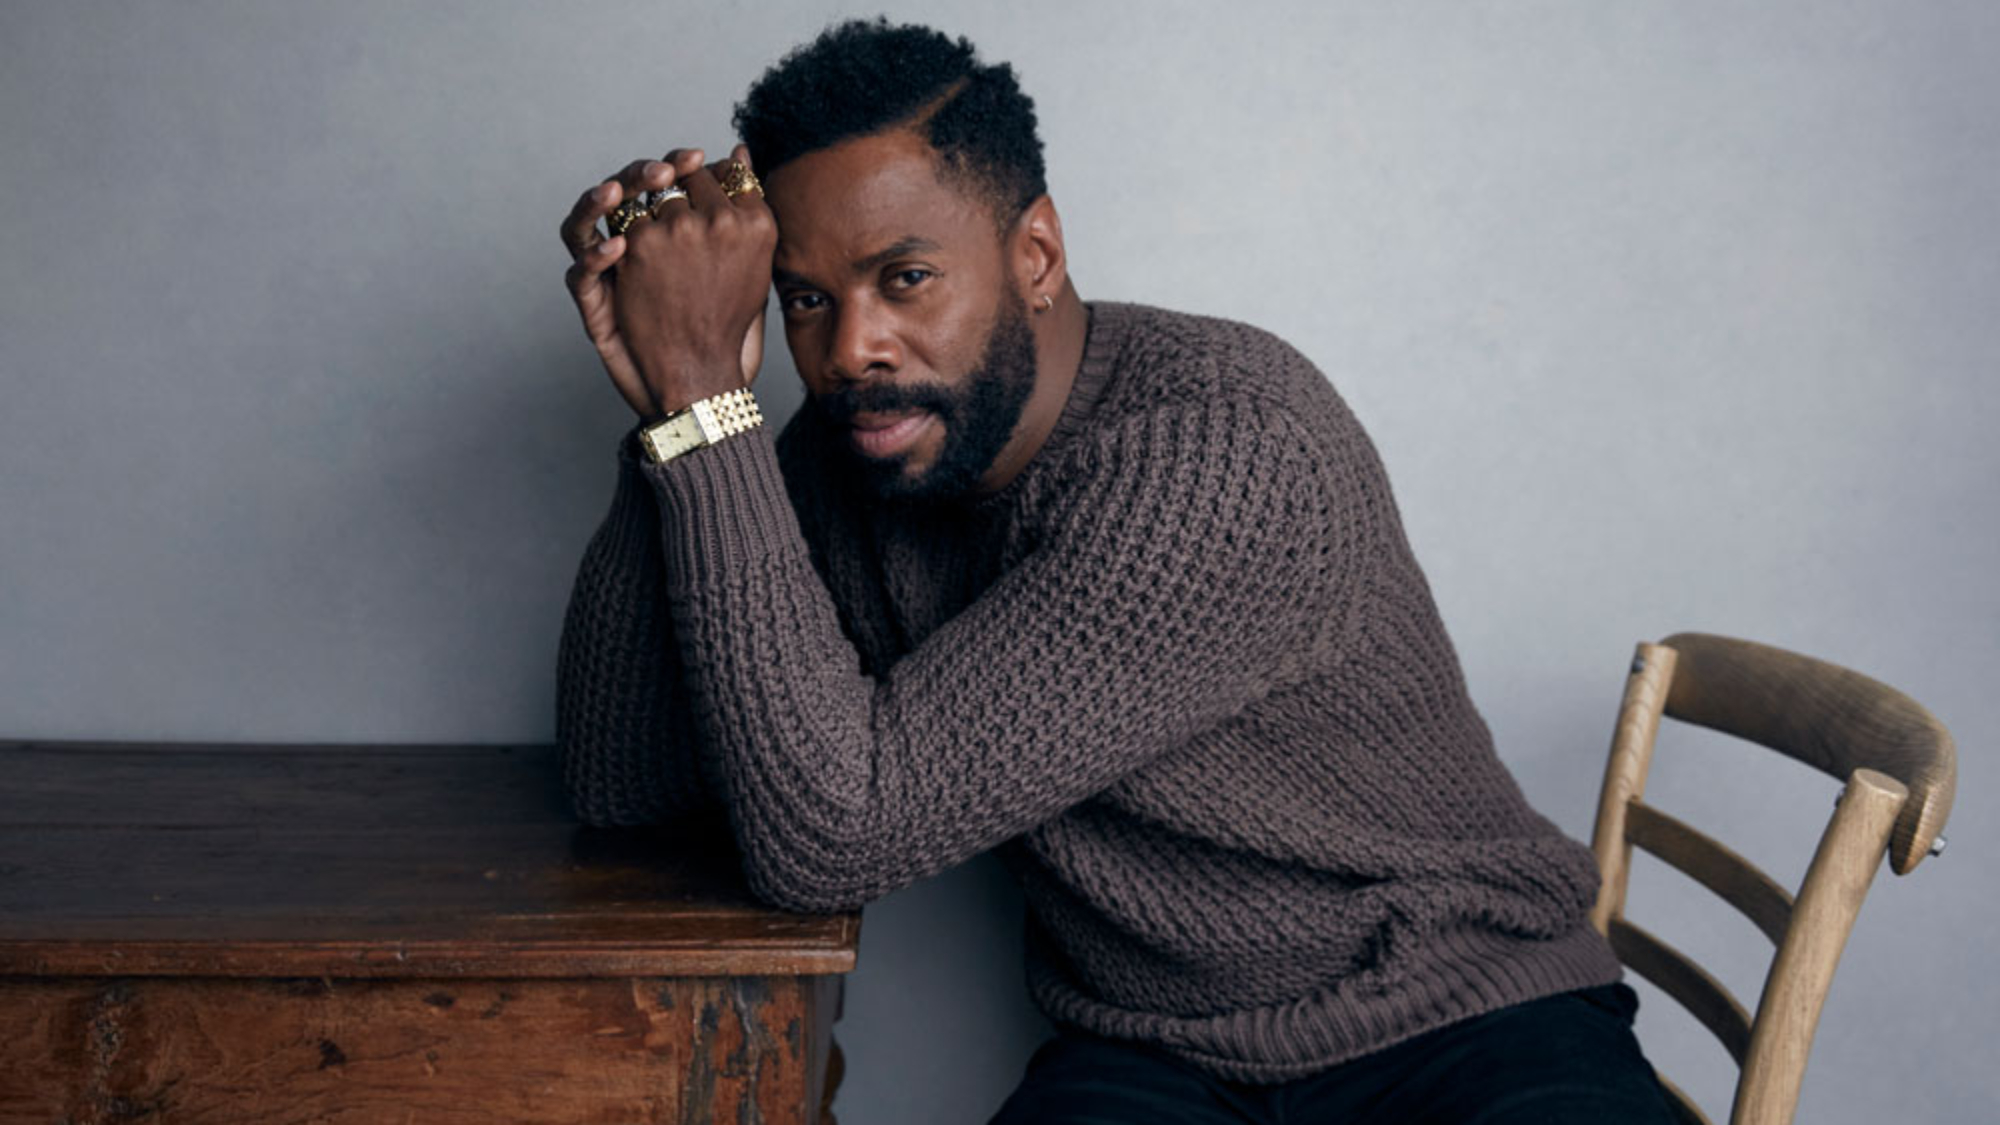 Colman Domingo poses for a portrait to promote the film "Assassination Nation" at the Music Lodge during the Sundance Film Festival on Monday, Jan. 22, 2018, in Park City, Utah. (Photo by Taylor Jewell/Invision/AP)